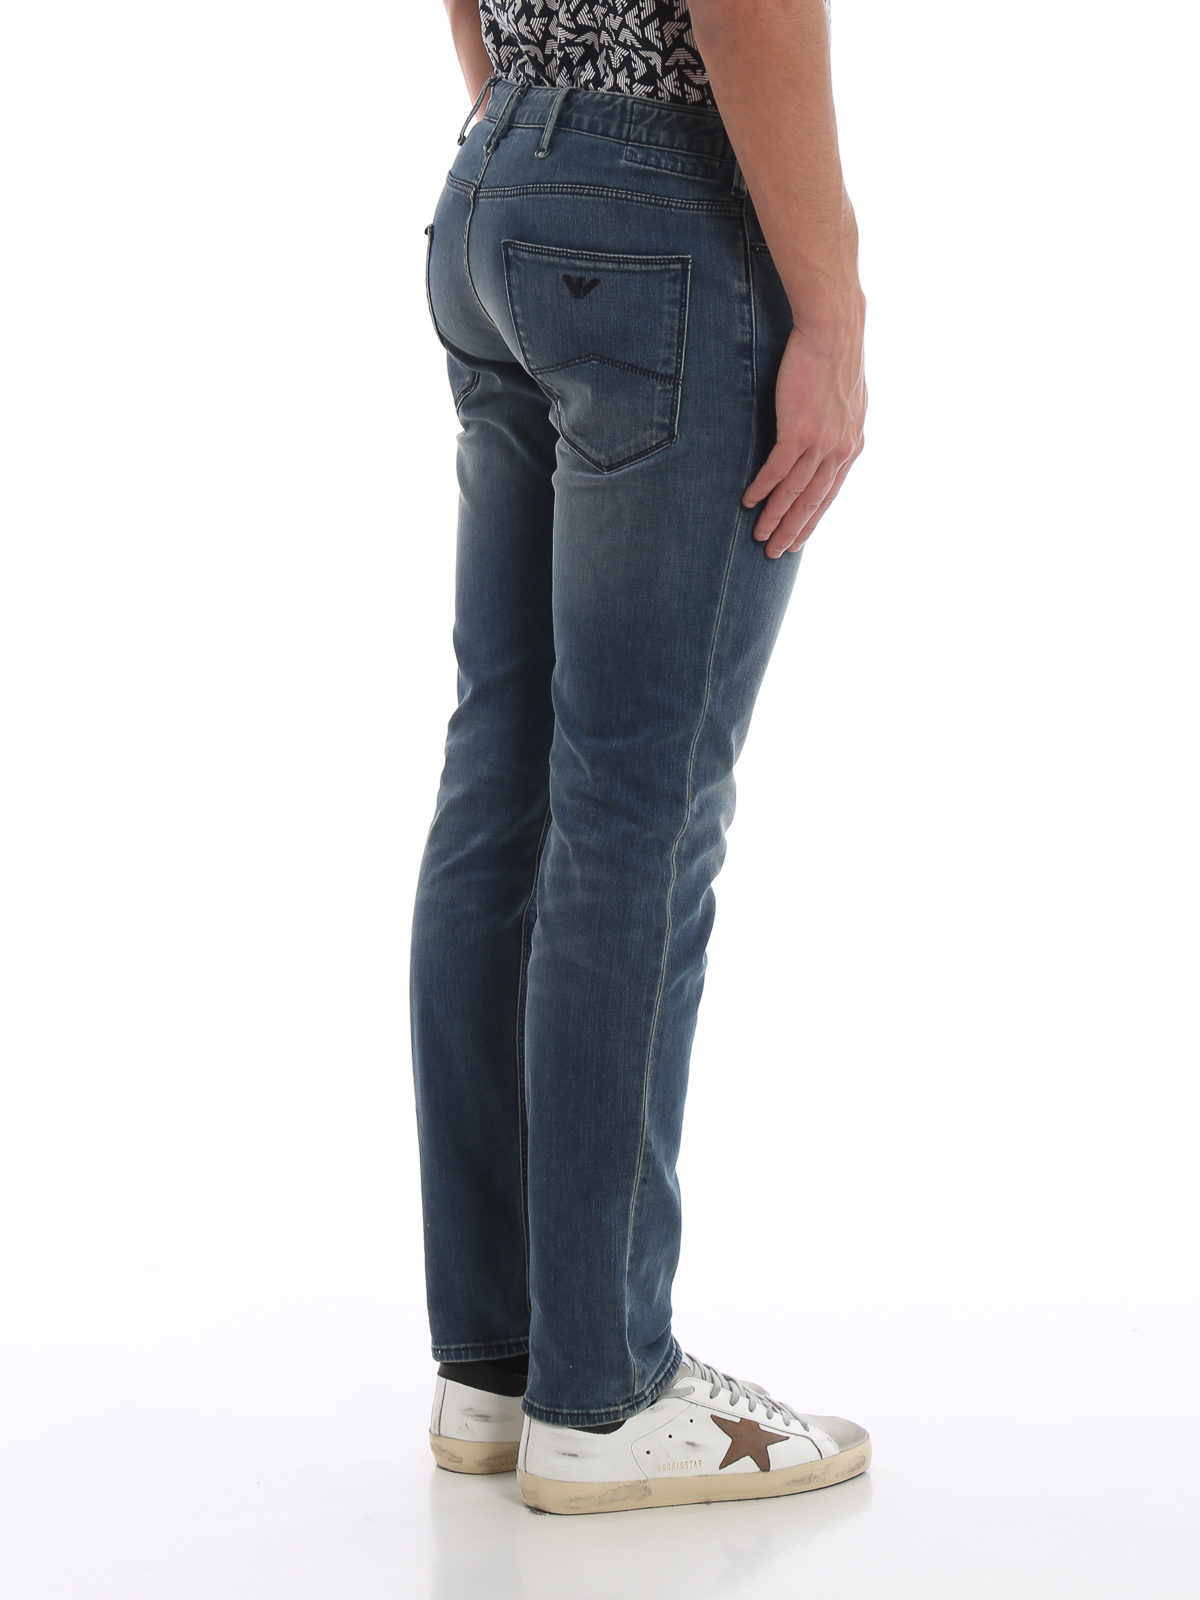 Jeans Tapered Fit Best Sale, SAVE 55% - mpgc.net